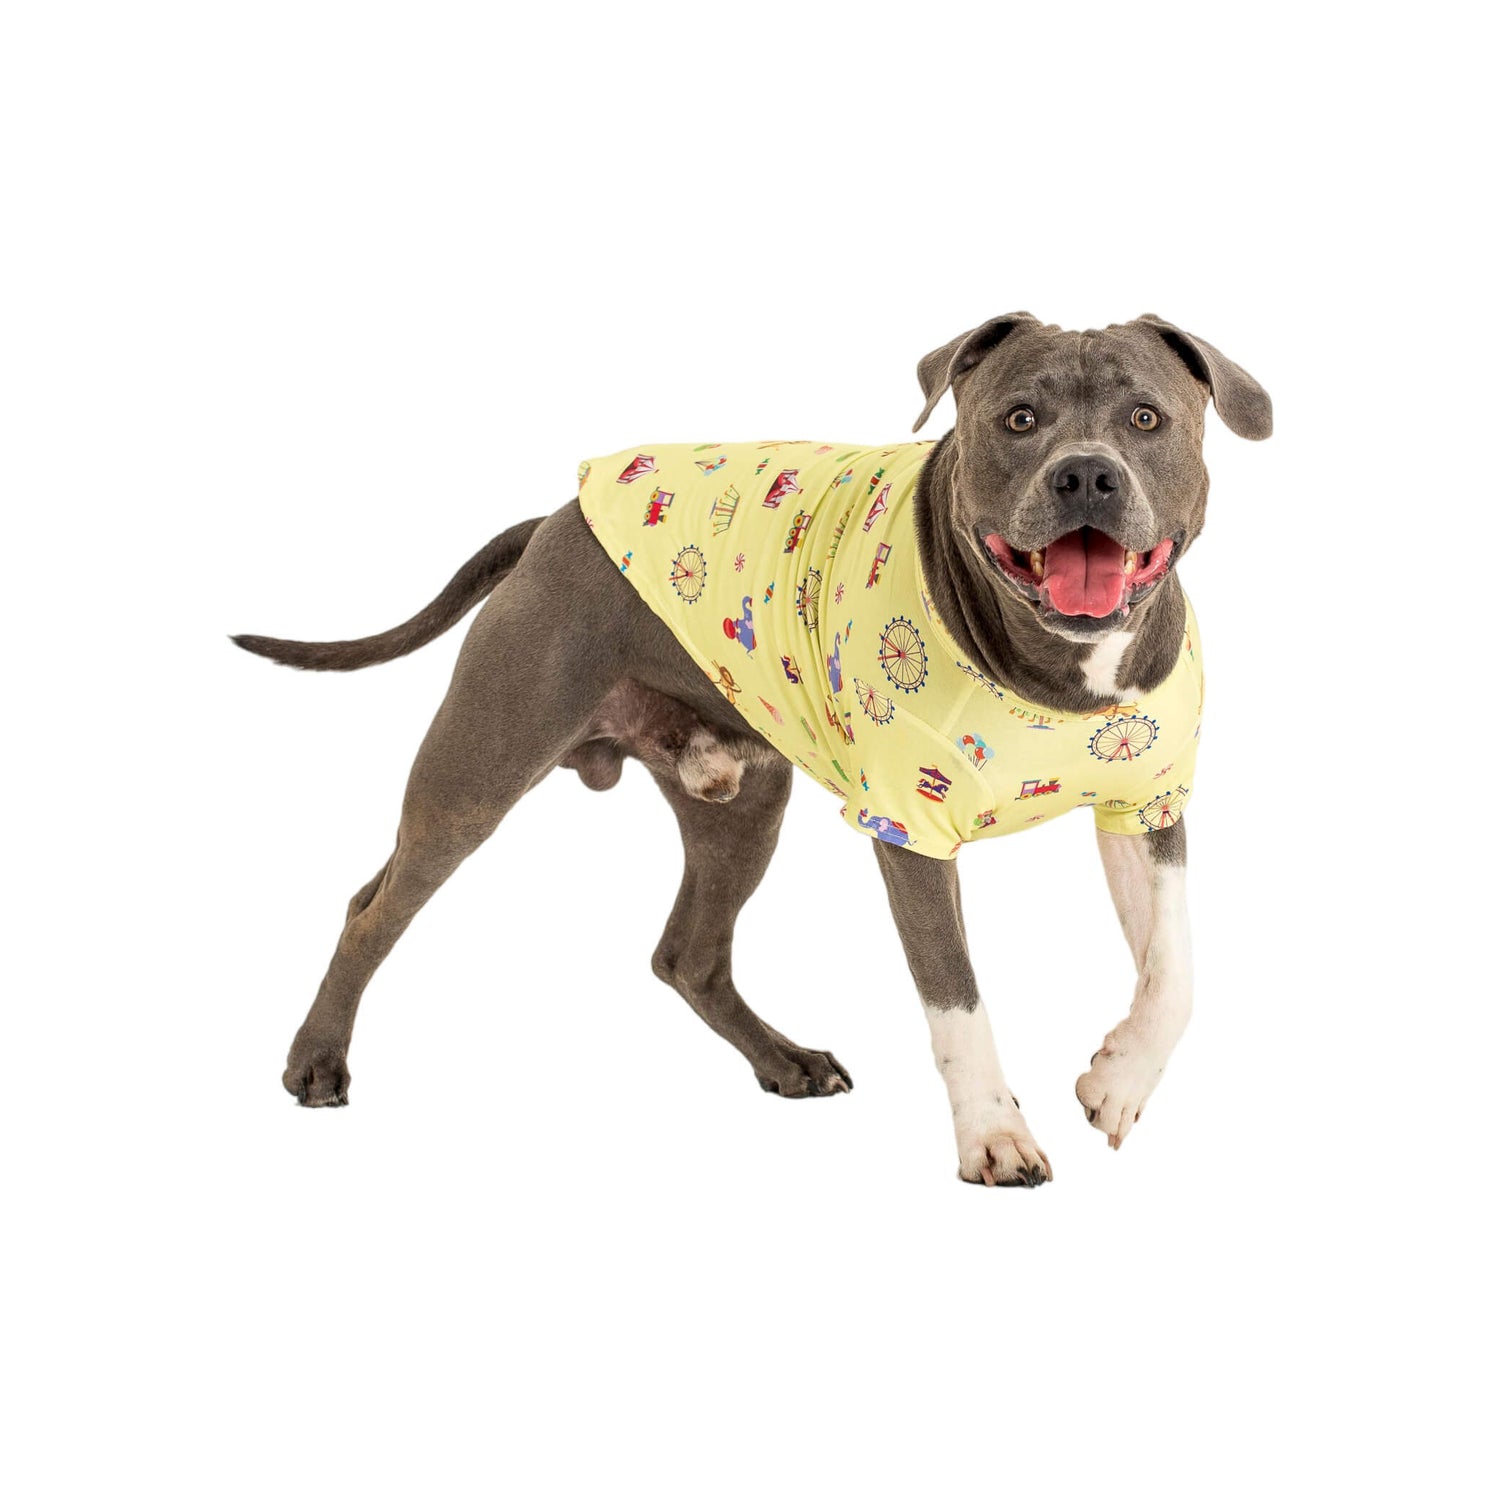 Luger the Staffy standing side on wearing a Vibrant Hound Admit one dog shirt. It has carnival theme printed on the dog clothing.